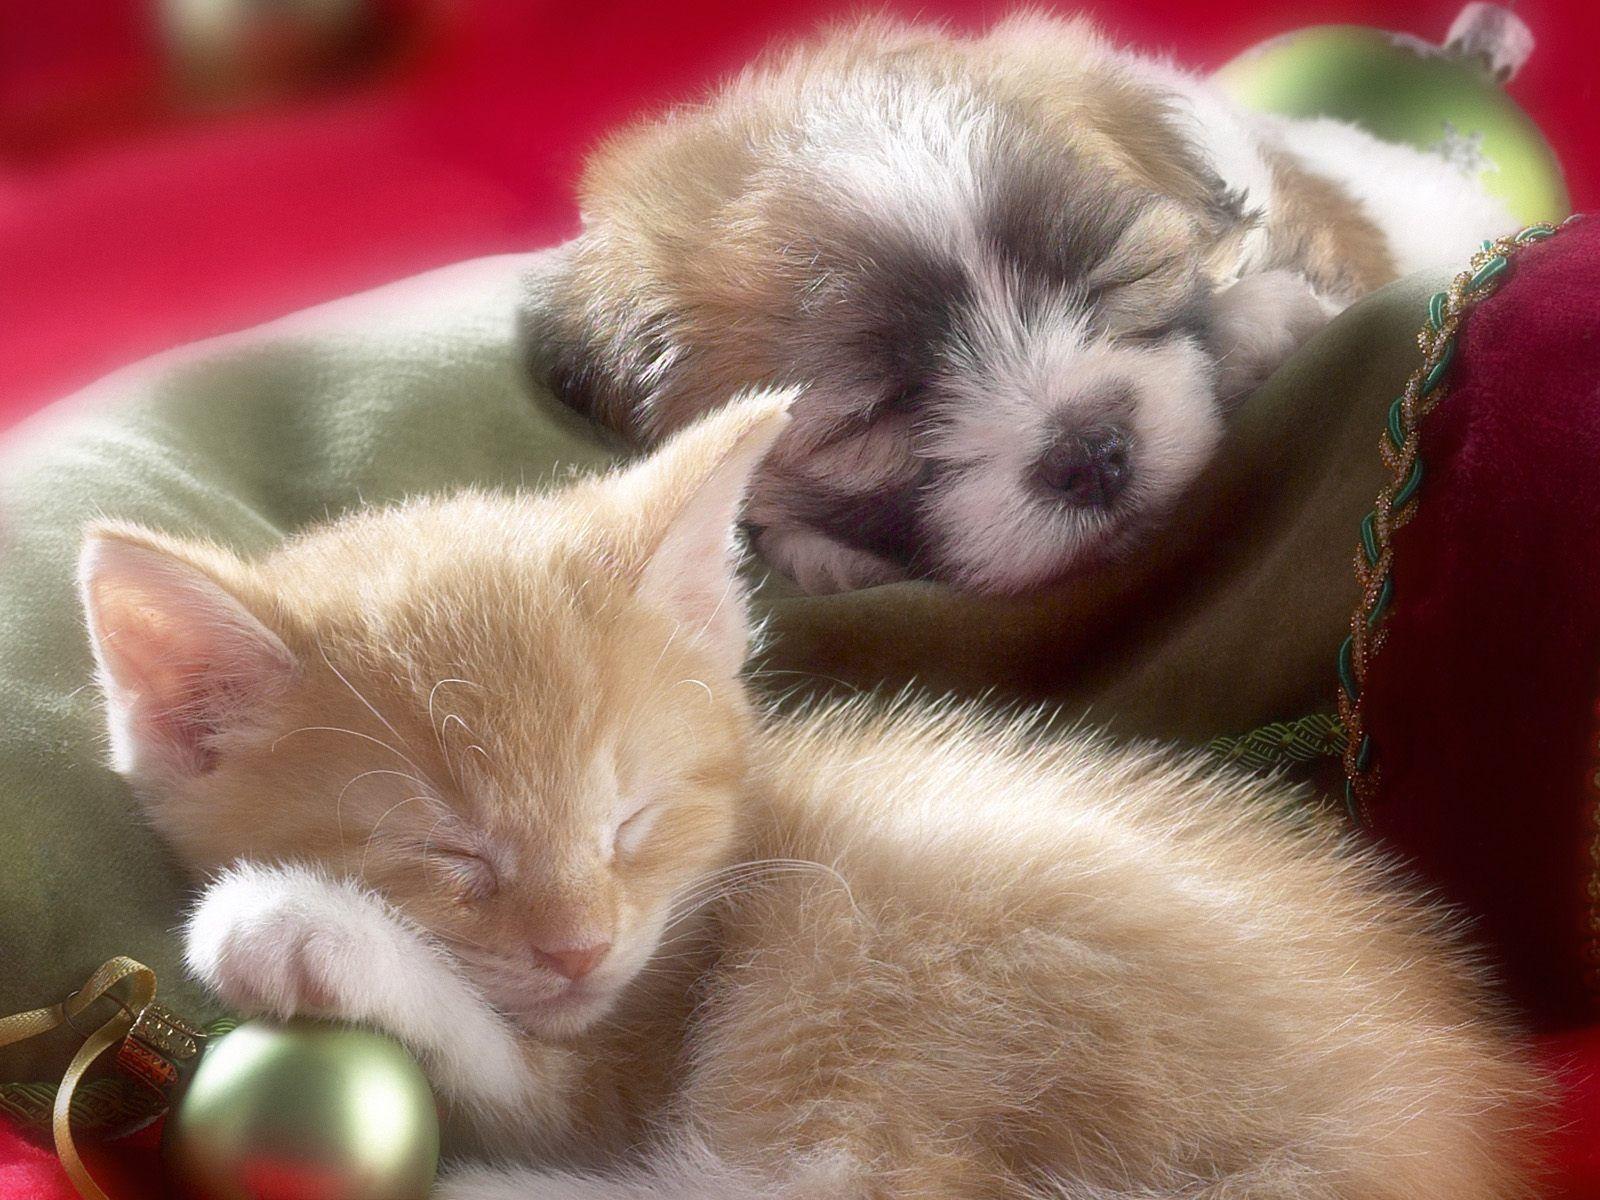 Puppies And Kittens Wallpaper Kitten Puppy High Quality